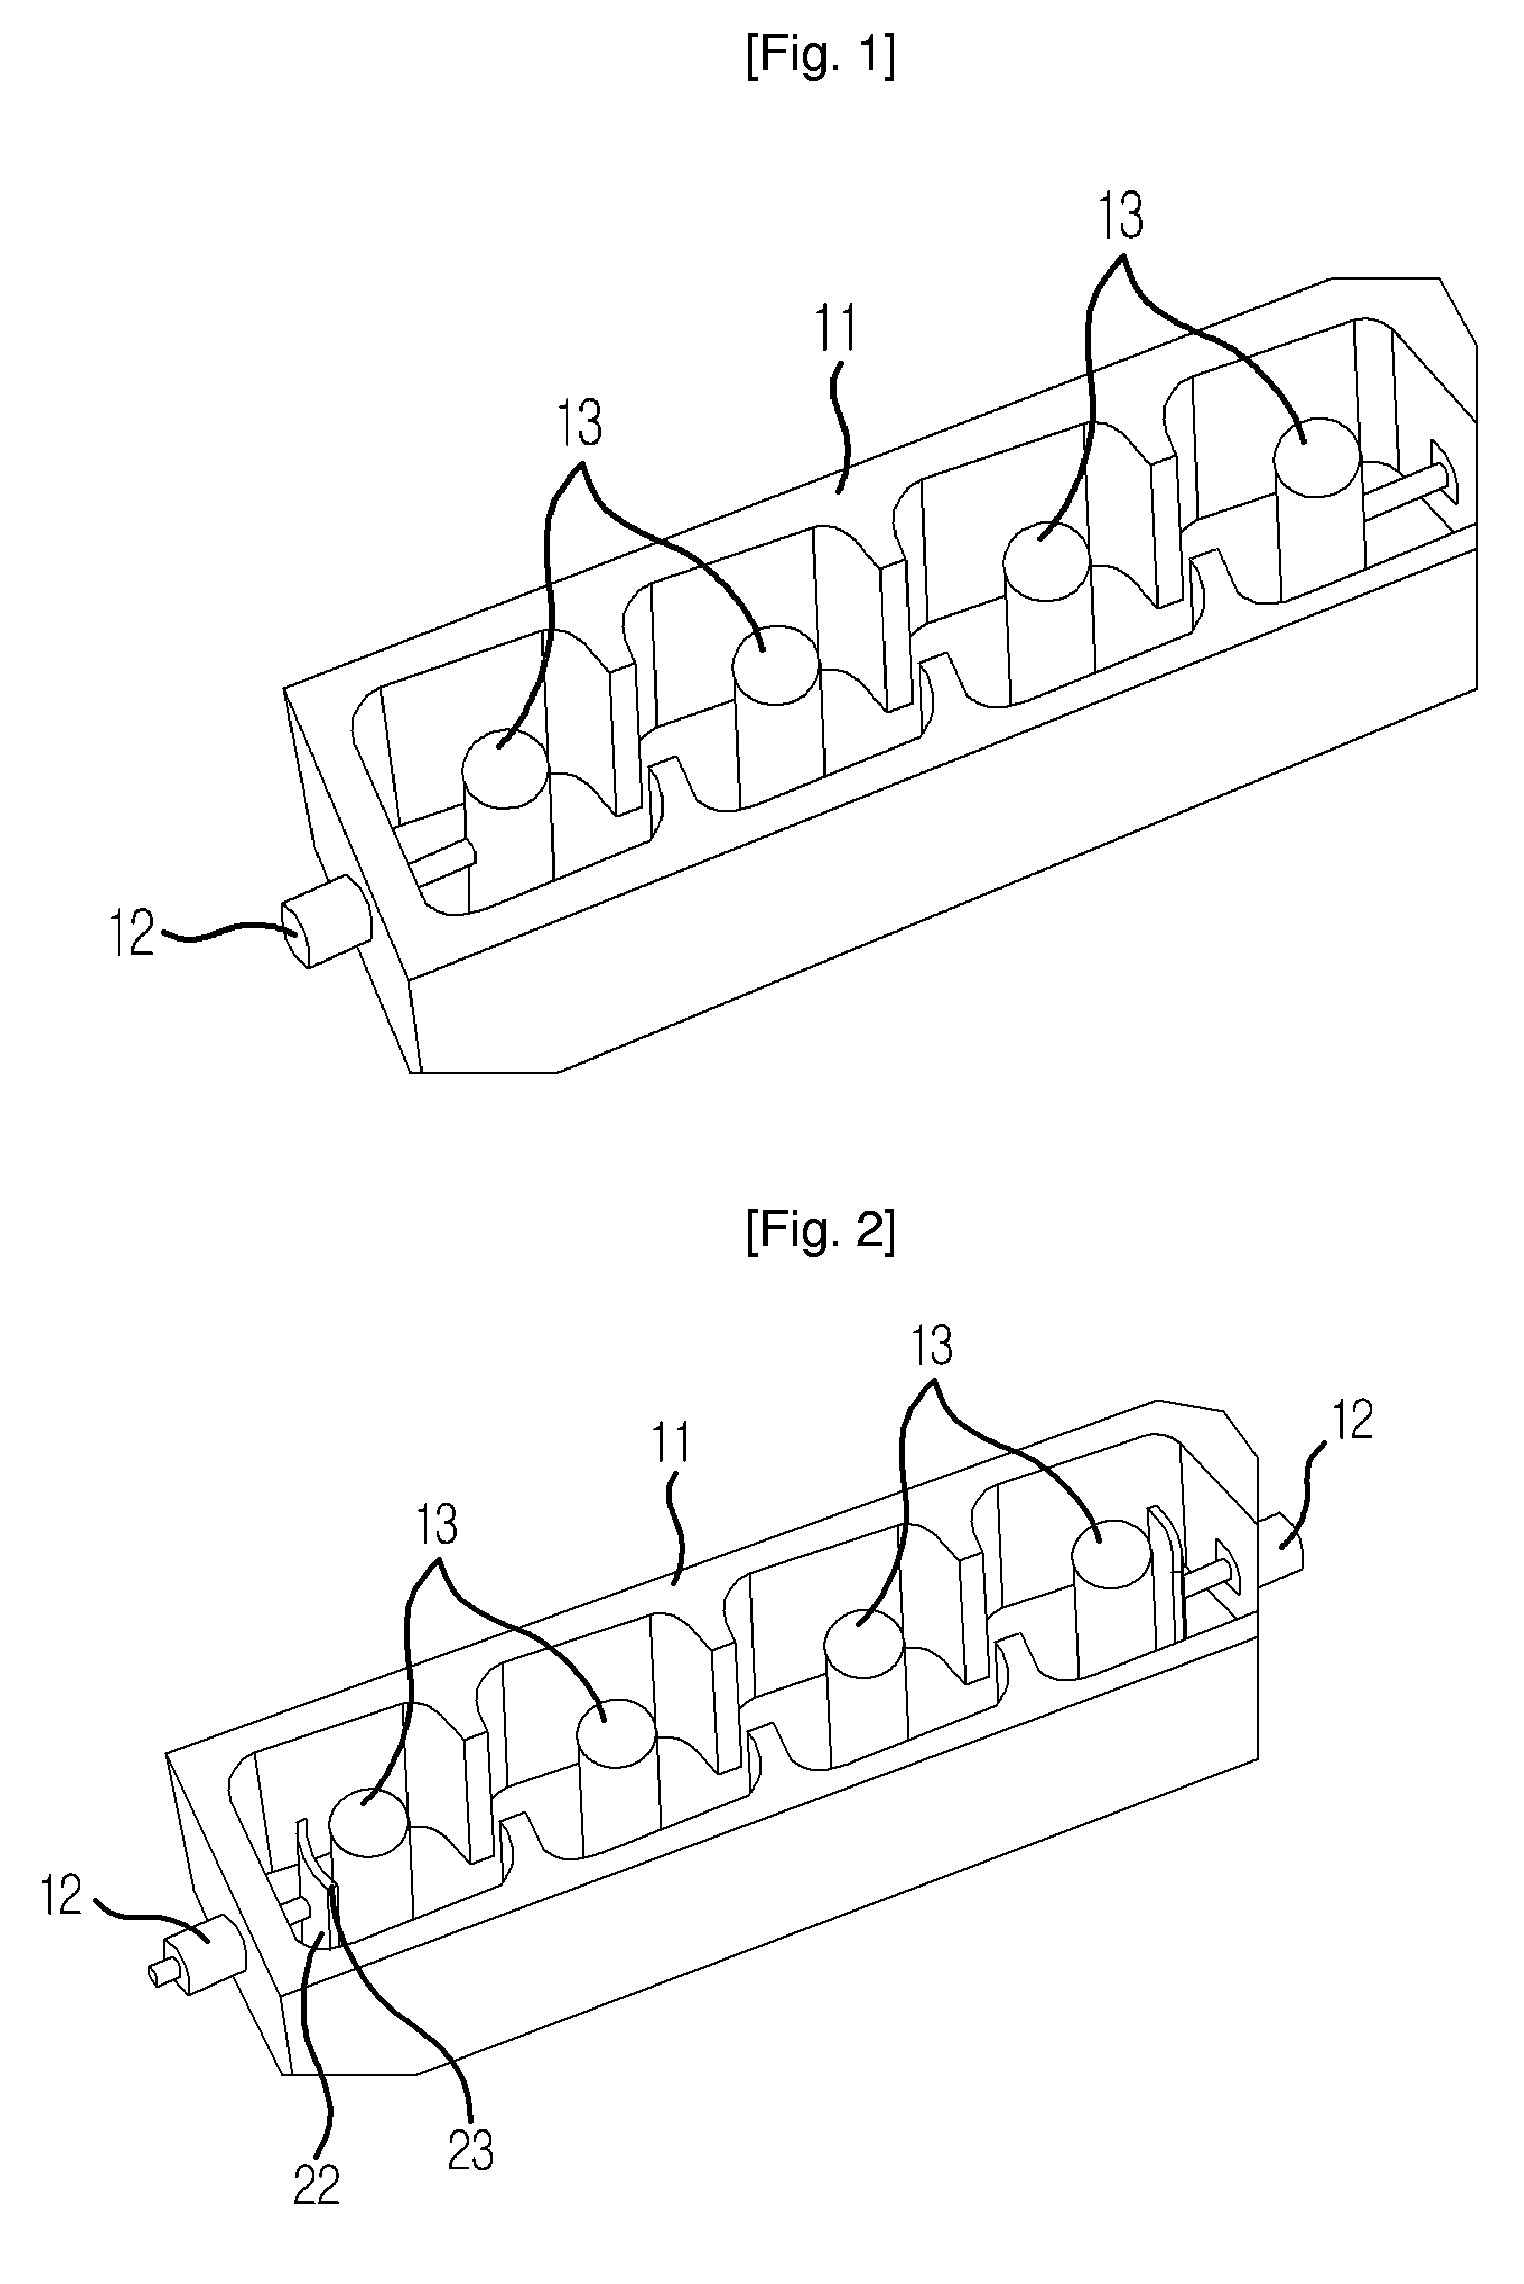 Filter Coupled by Conductive Plates Having Curved Surface